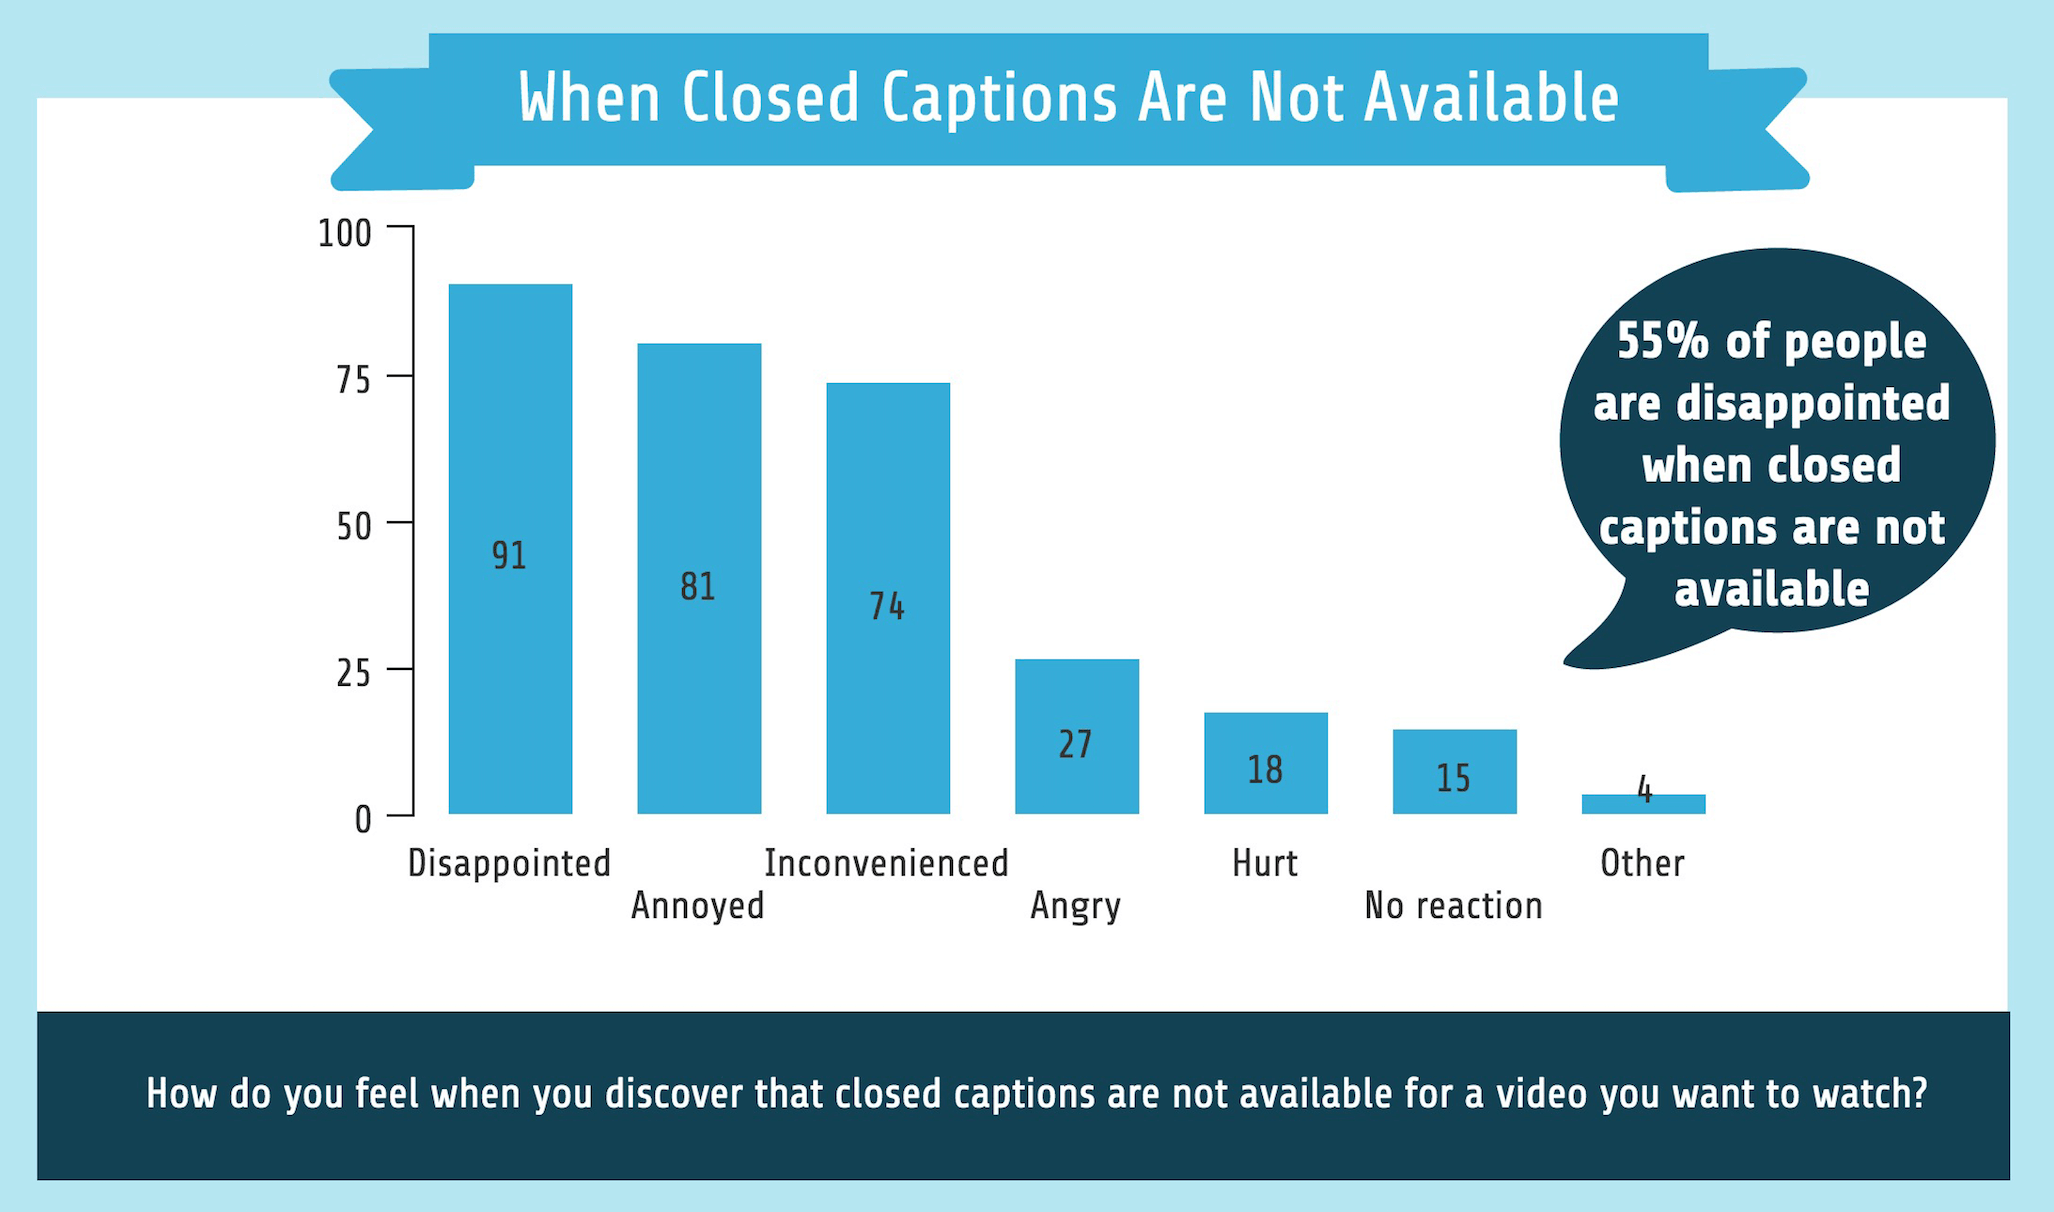 When closed captions are not available. How do you feel when you discover that closed captions are not available for a video you want to watch? Disappointed 91, Annoyed 81, Inconvenienced 74, Angry 27, Hurt 18, No reaction 15, Other 4.